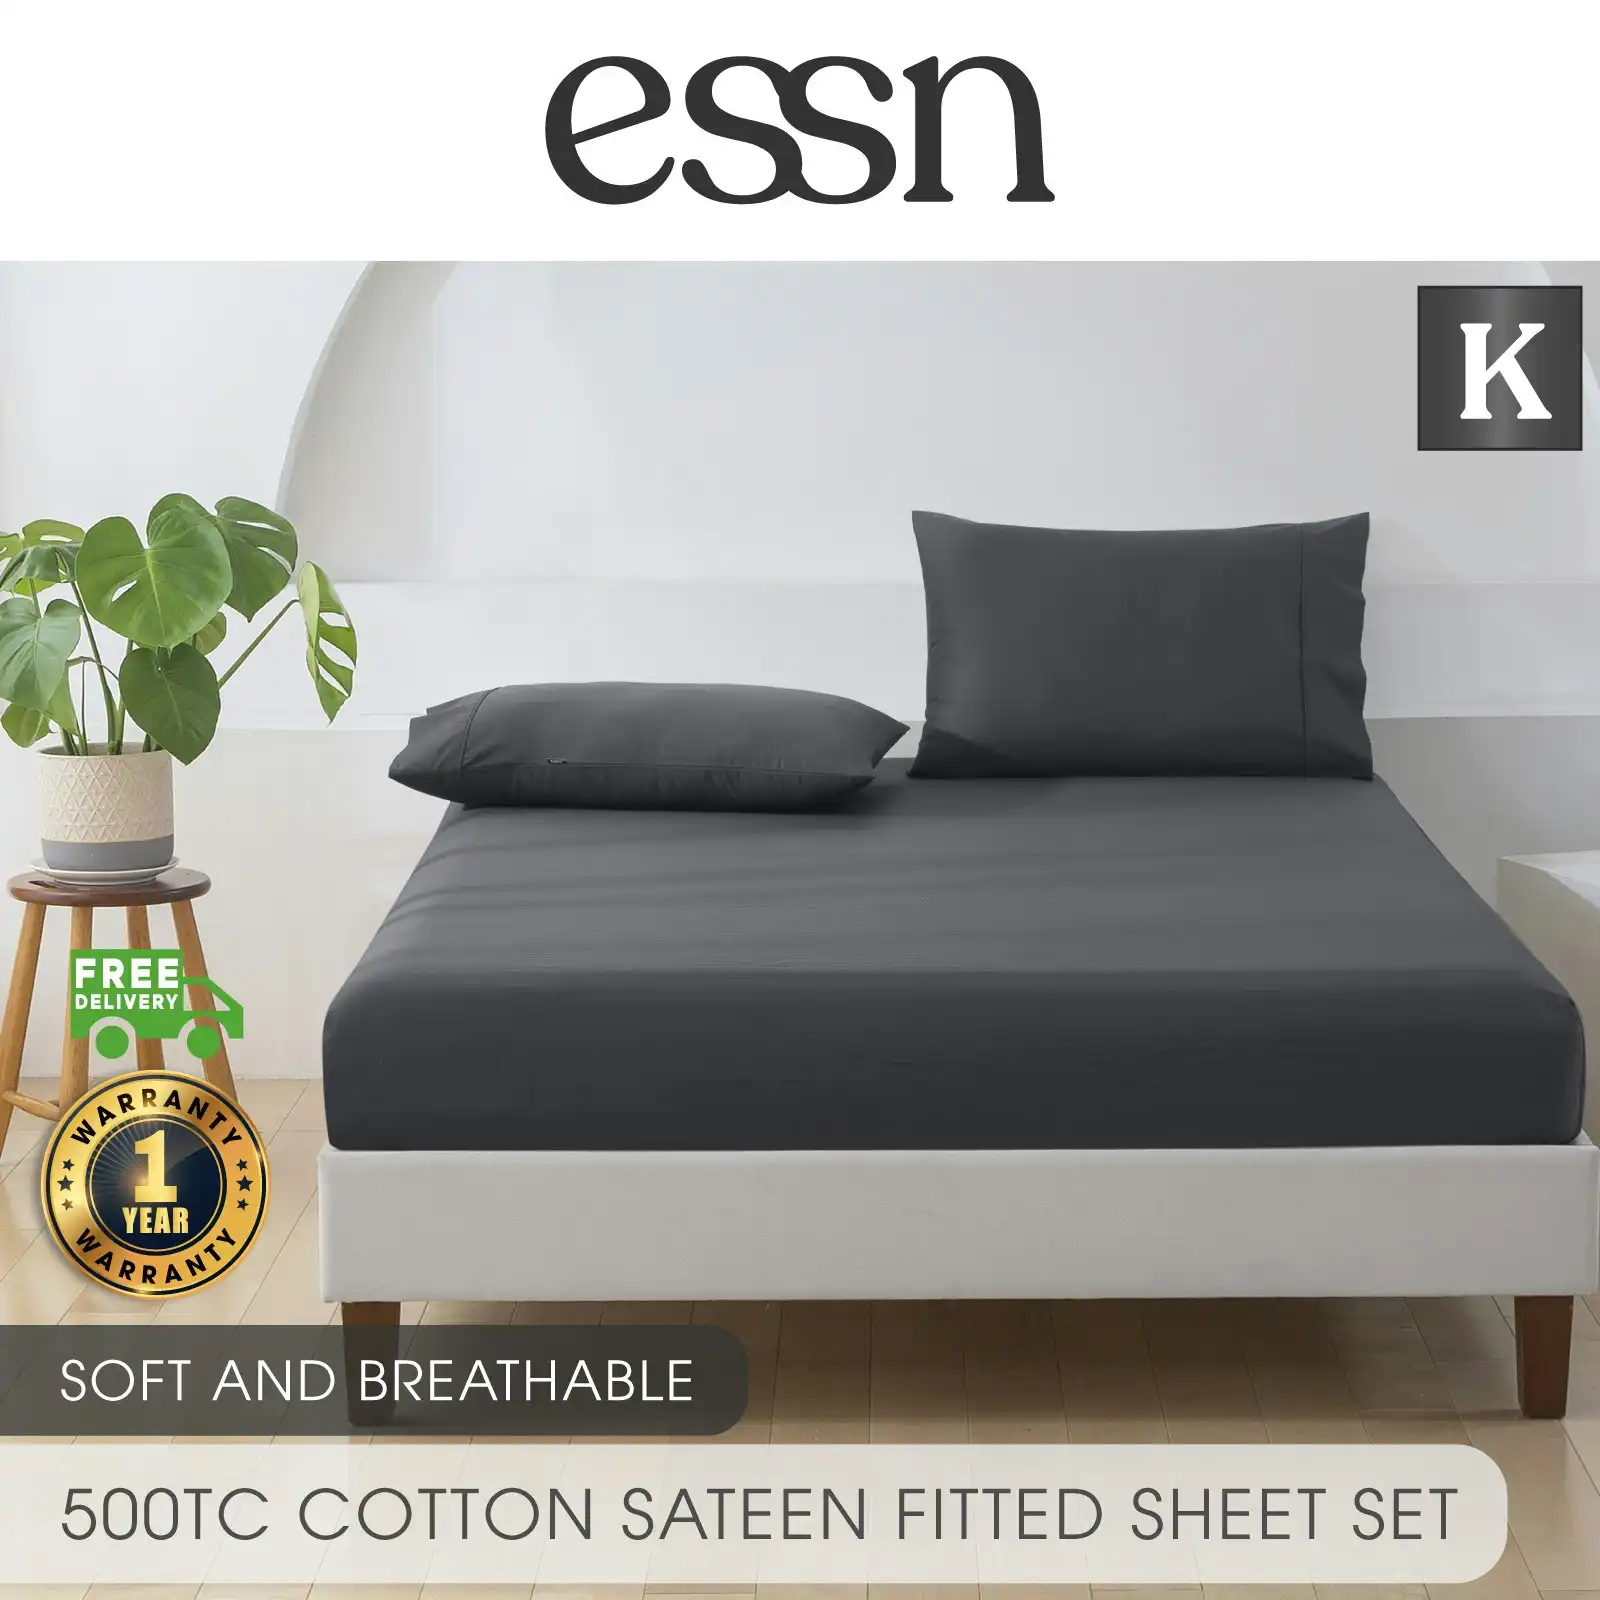 ESSN 500TC Cotton Sateen Fitted Sheet Set Charcoal  King Bed